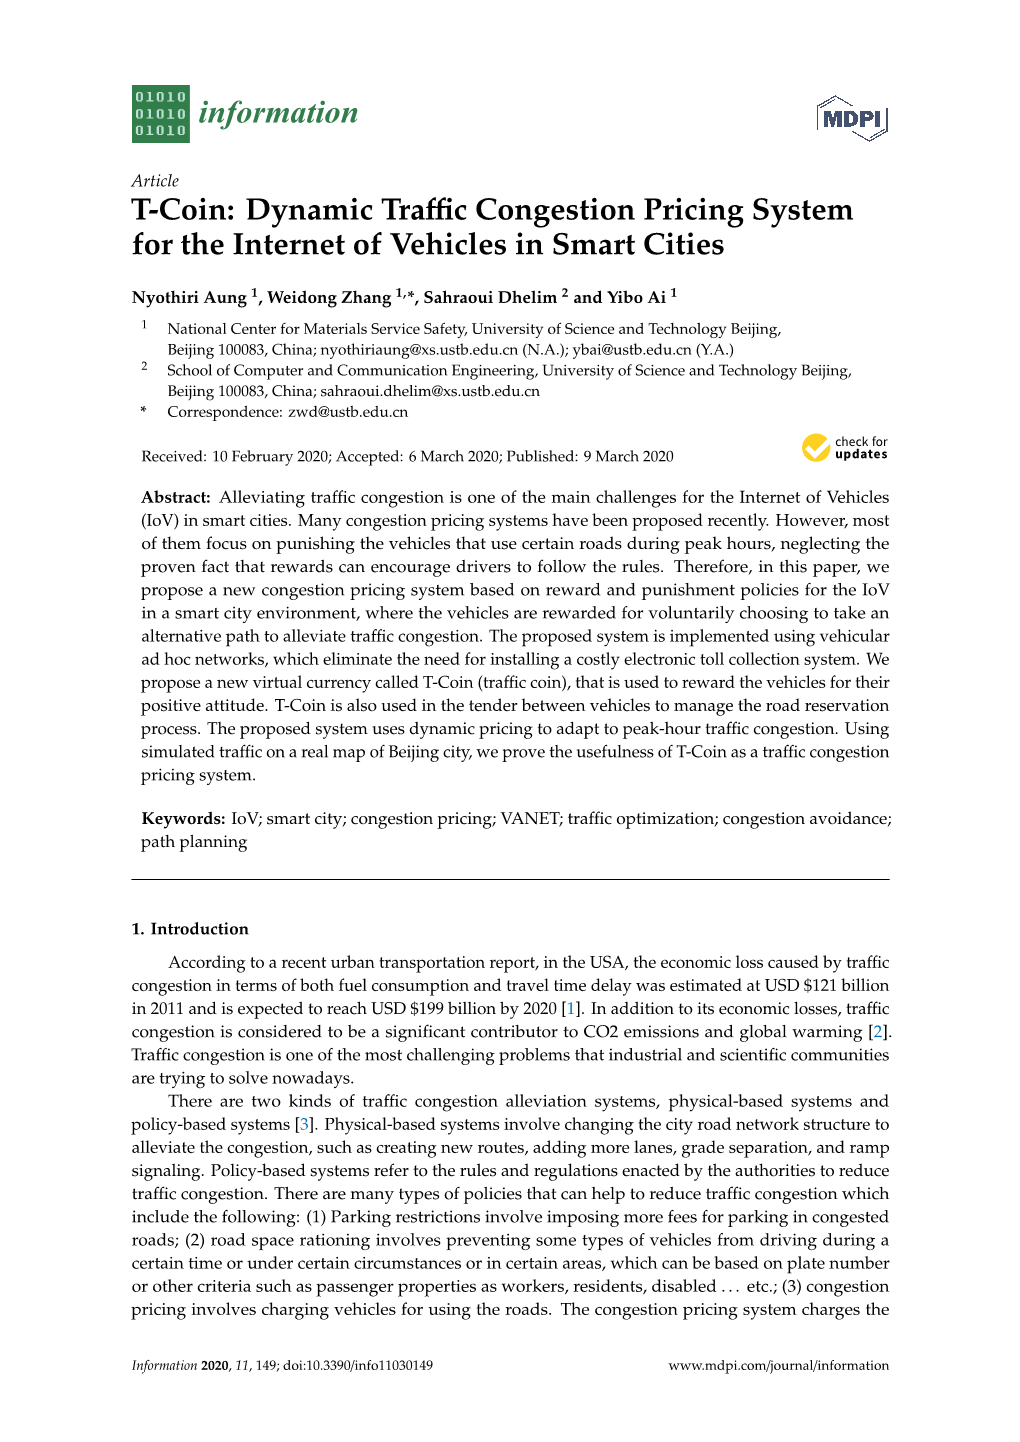 T-Coin: Dynamic Traffic Congestion Pricing System for the Internet of Vehicles in Smart Cities